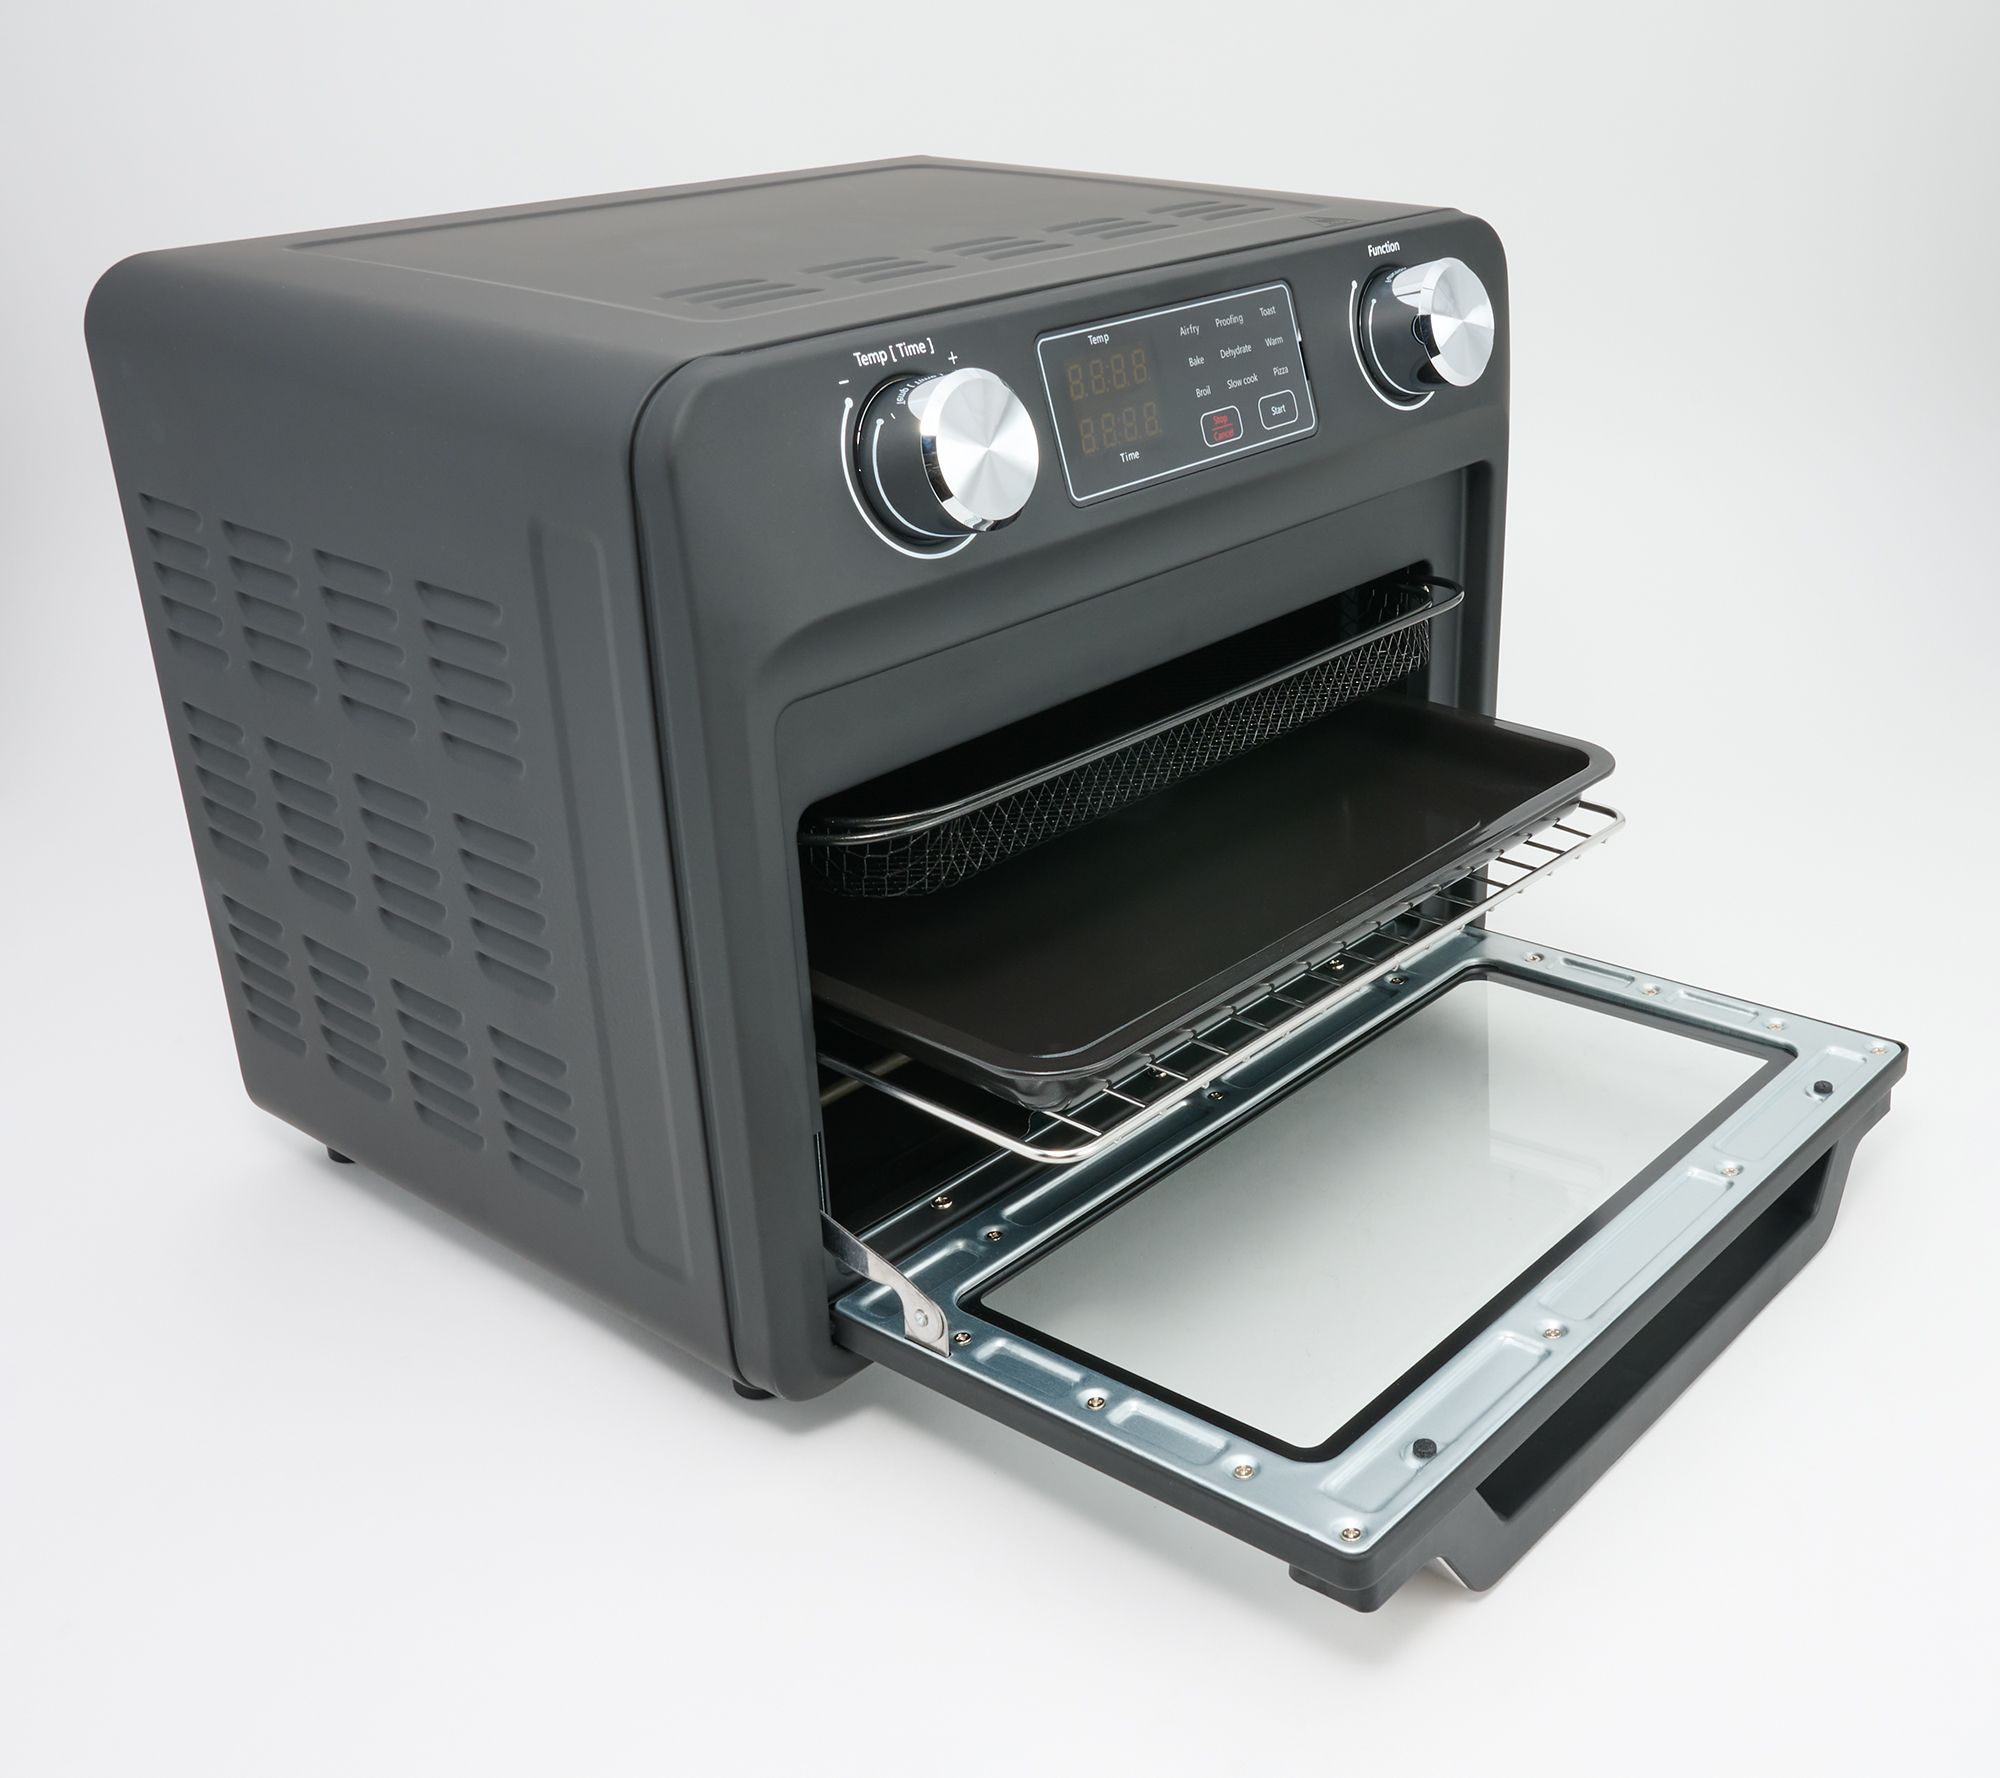 Bistro Noir 6-in-1 Air Fry Toaster Oven